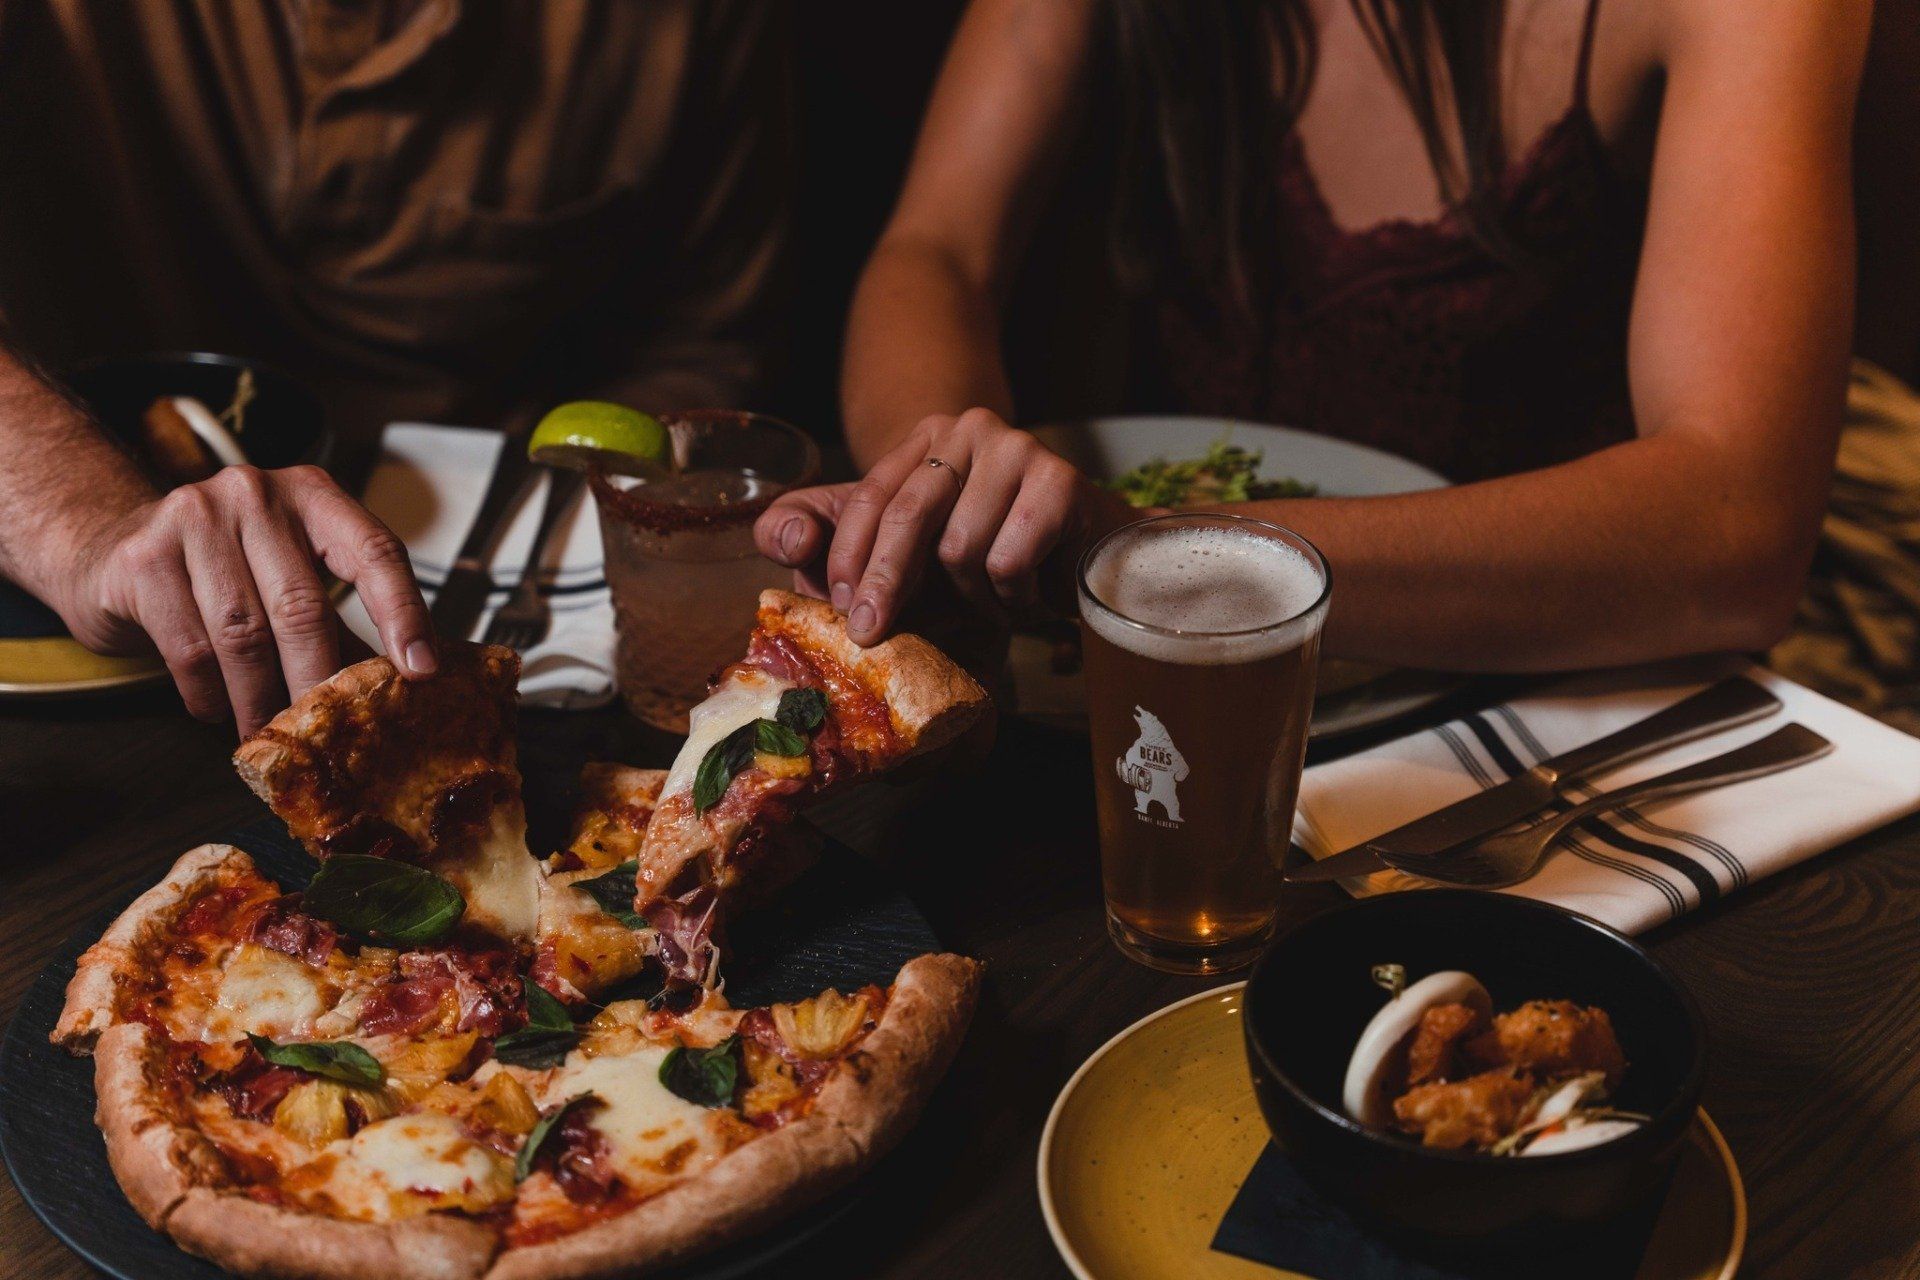 Two people eating pizza and drinking beer.